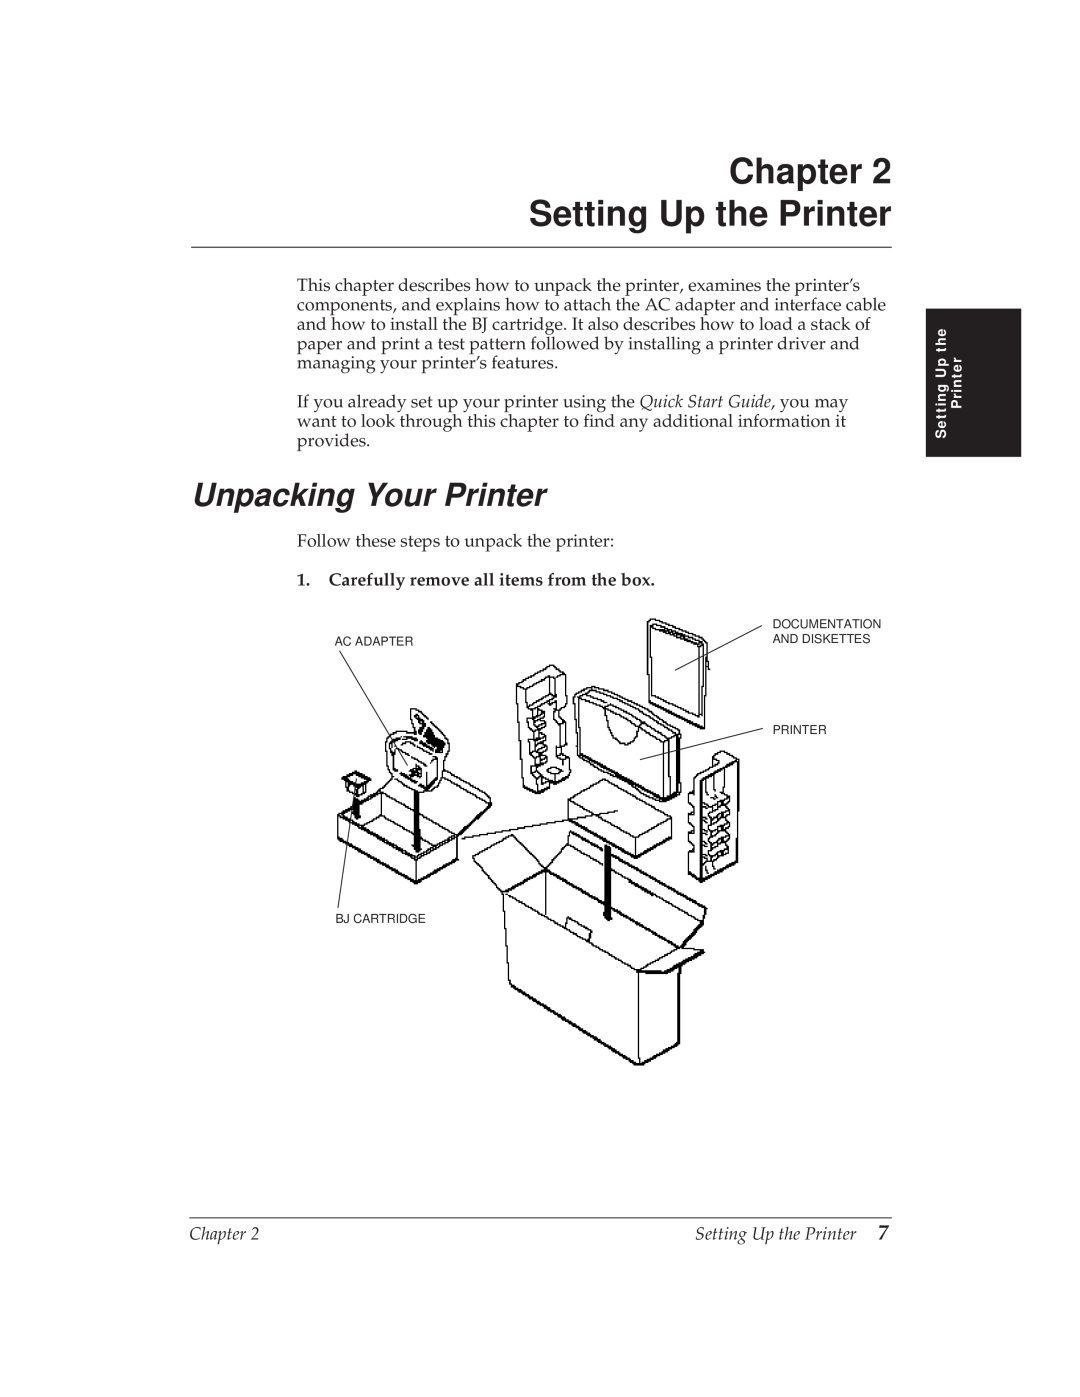 Canon BJ-30 manual Chapter Setting Up the Printer, Unpacking Your Printer, Carefully remove all items from the box 